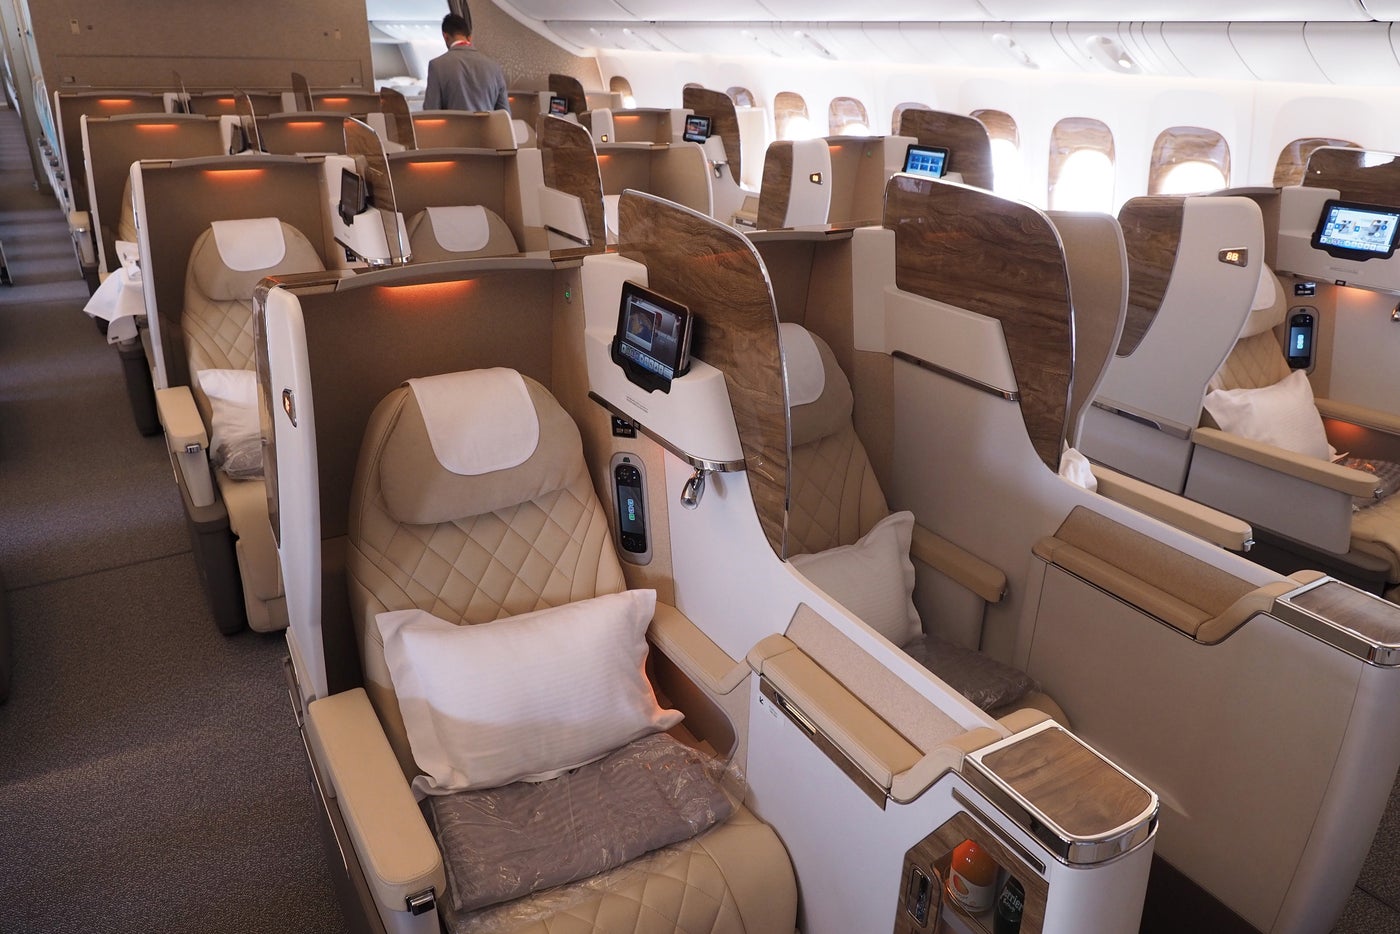 Emirates Fancy New Business Class Still Has Middle Seats 4157